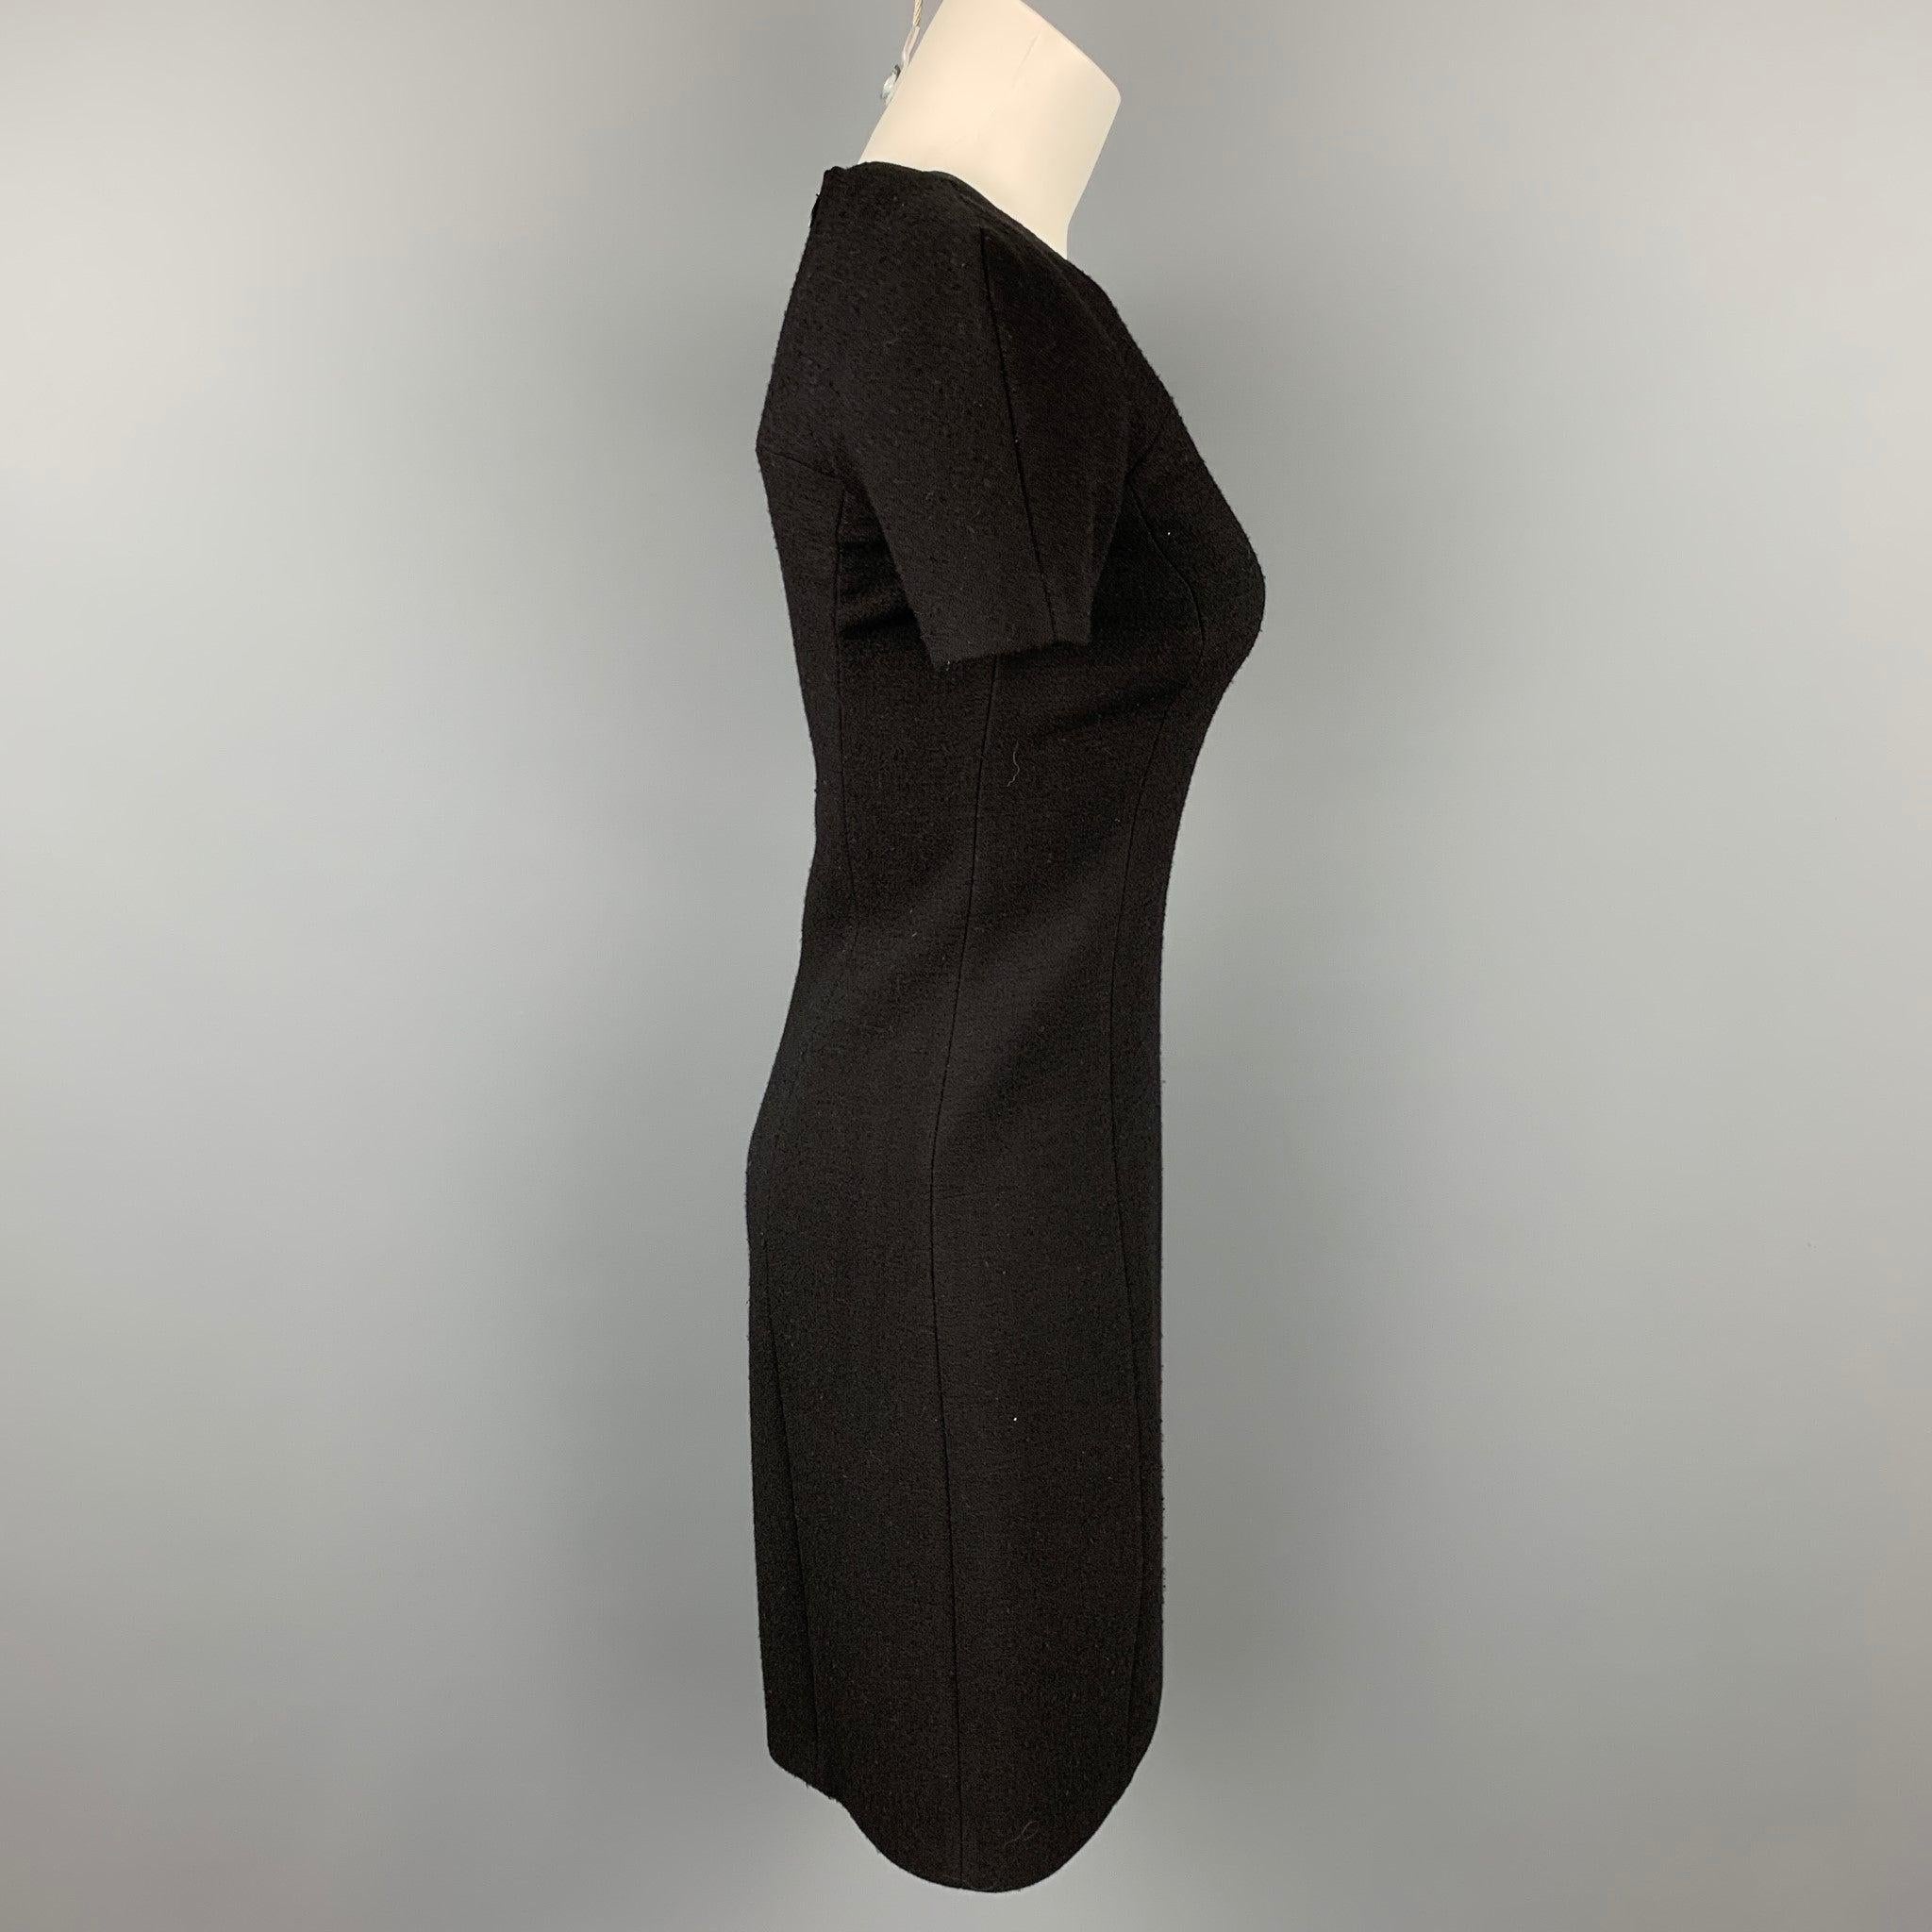 MICHAEL KORS dress comes in a black crepe with a slip liner featuring a shift style and a back zip up closure. Moderate wear. Made in Italy.Very Good
Pre-Owned Condition. 

Marked:   0 

Measurements: 
 
Shoulder: 17 inches  Bust: 30 inches  Waist: